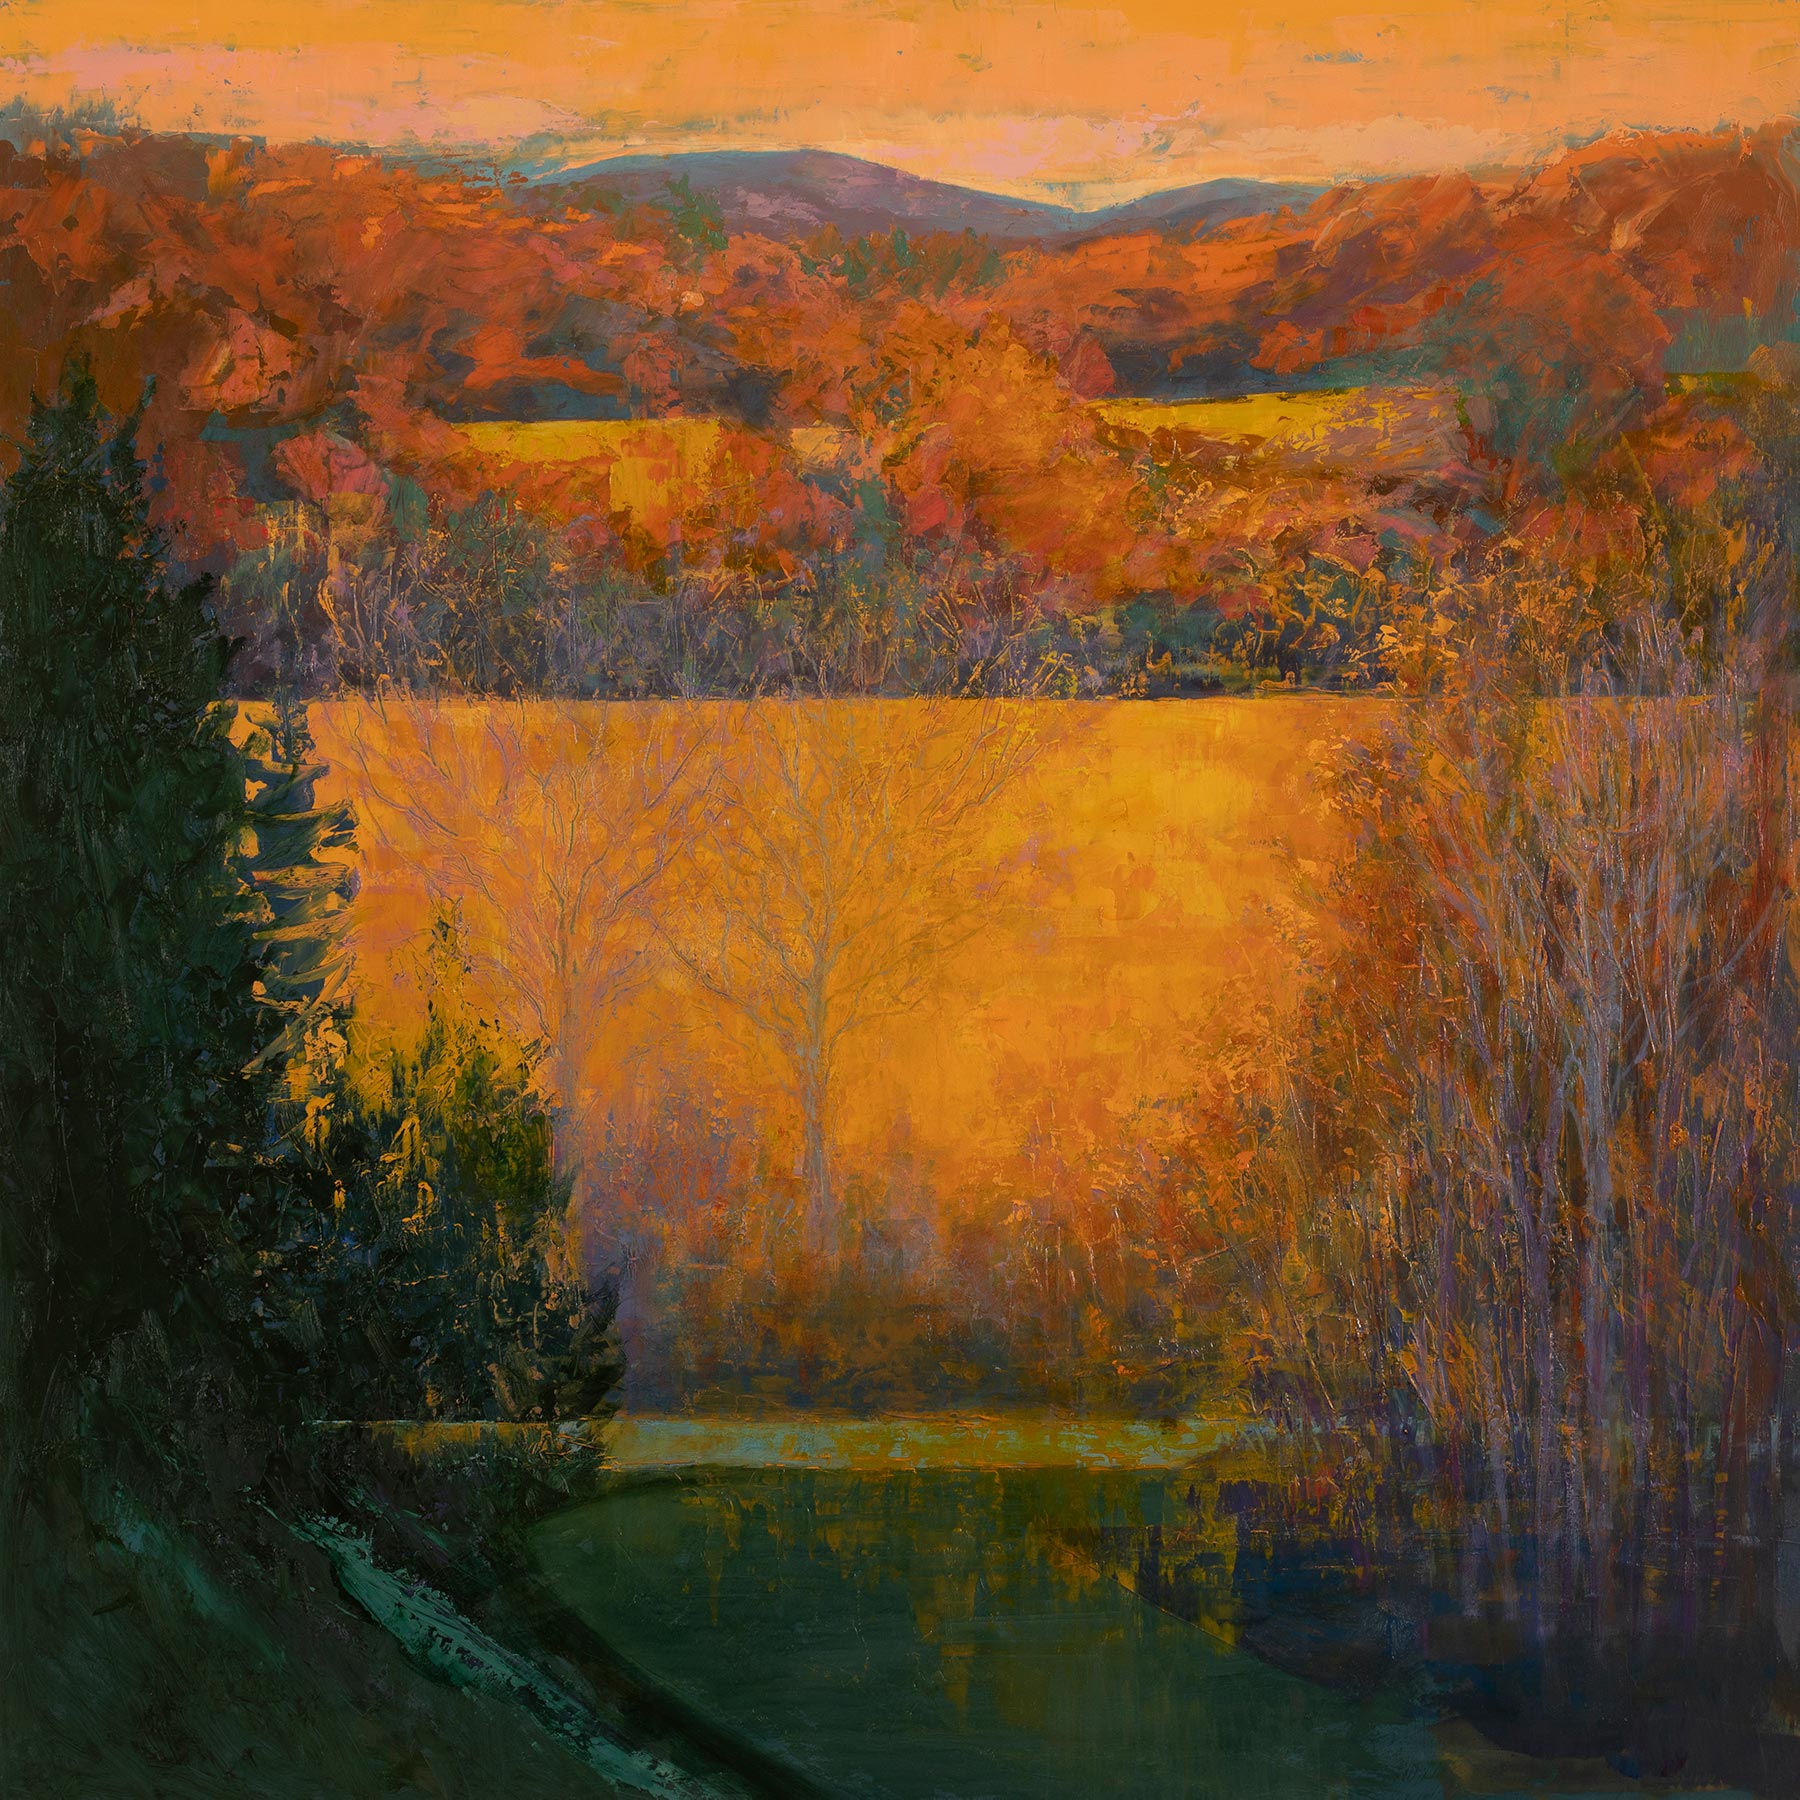 View from the Ridge: Autumn Fire, oil on panel, 30 x 30 inches, 2020, SOLD